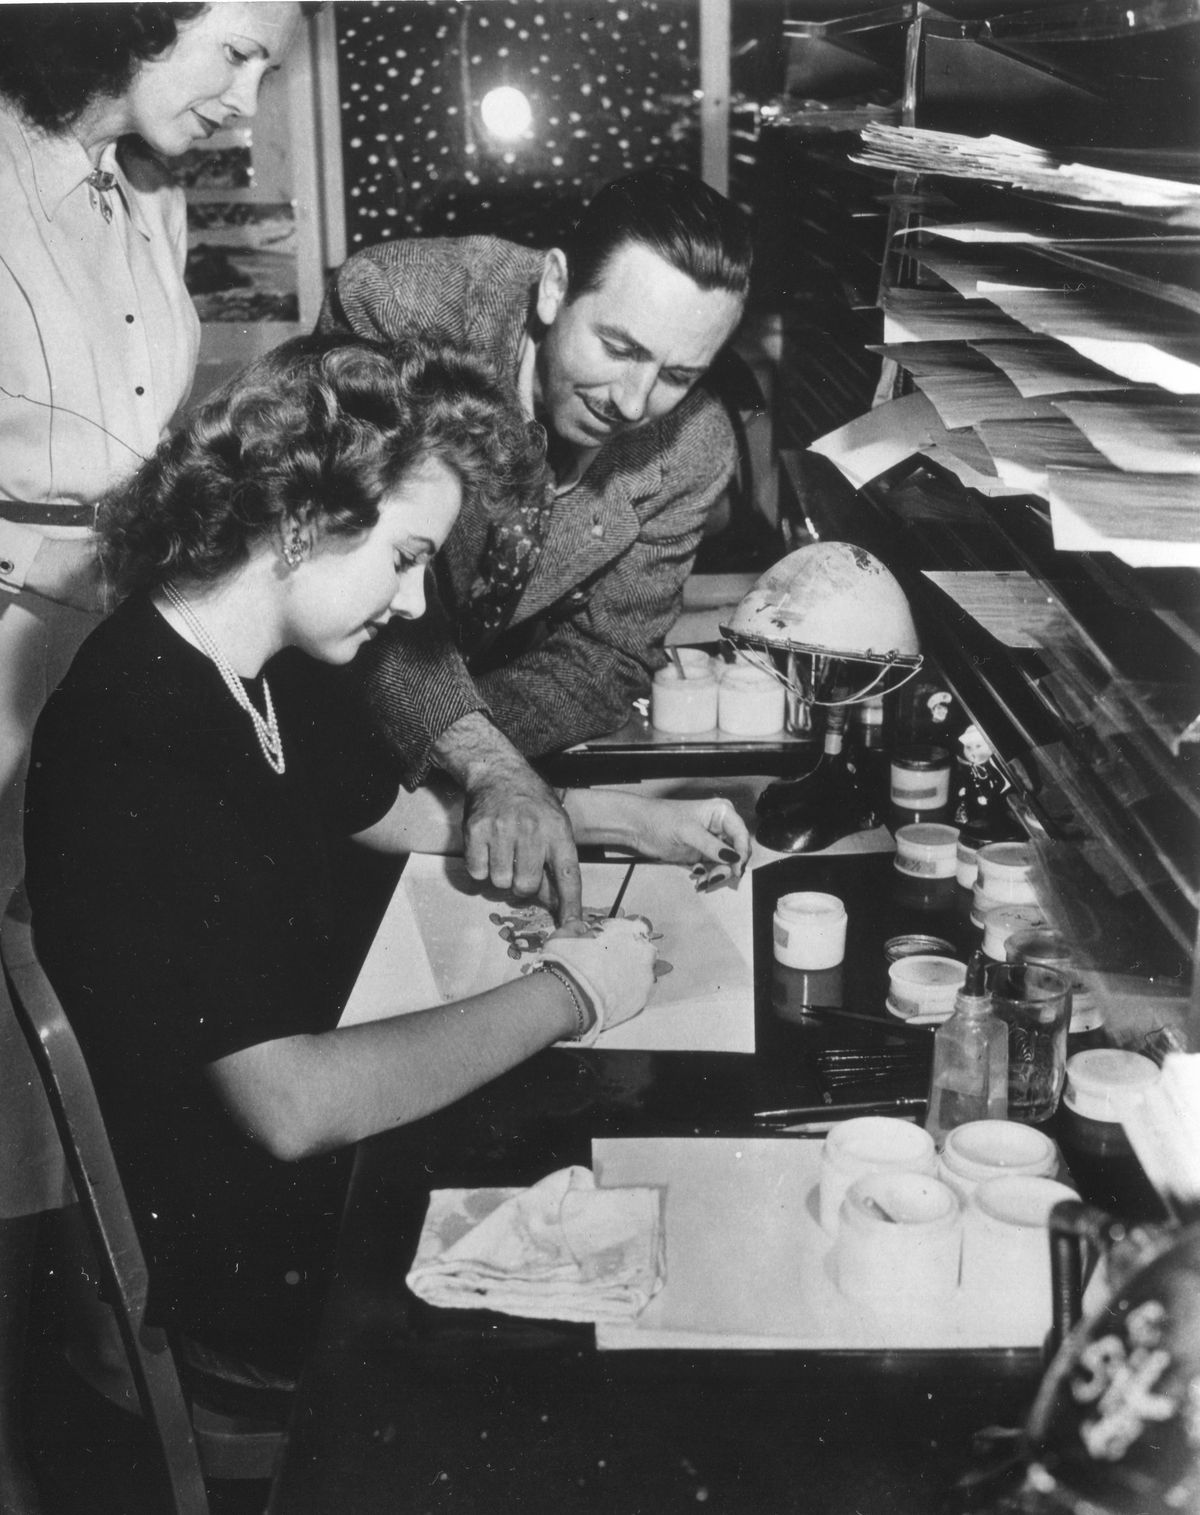 Walt Disney leans over painter Edith Moore as she works at her desk on an animation cel from an unspecified film in an archival photo from 1943